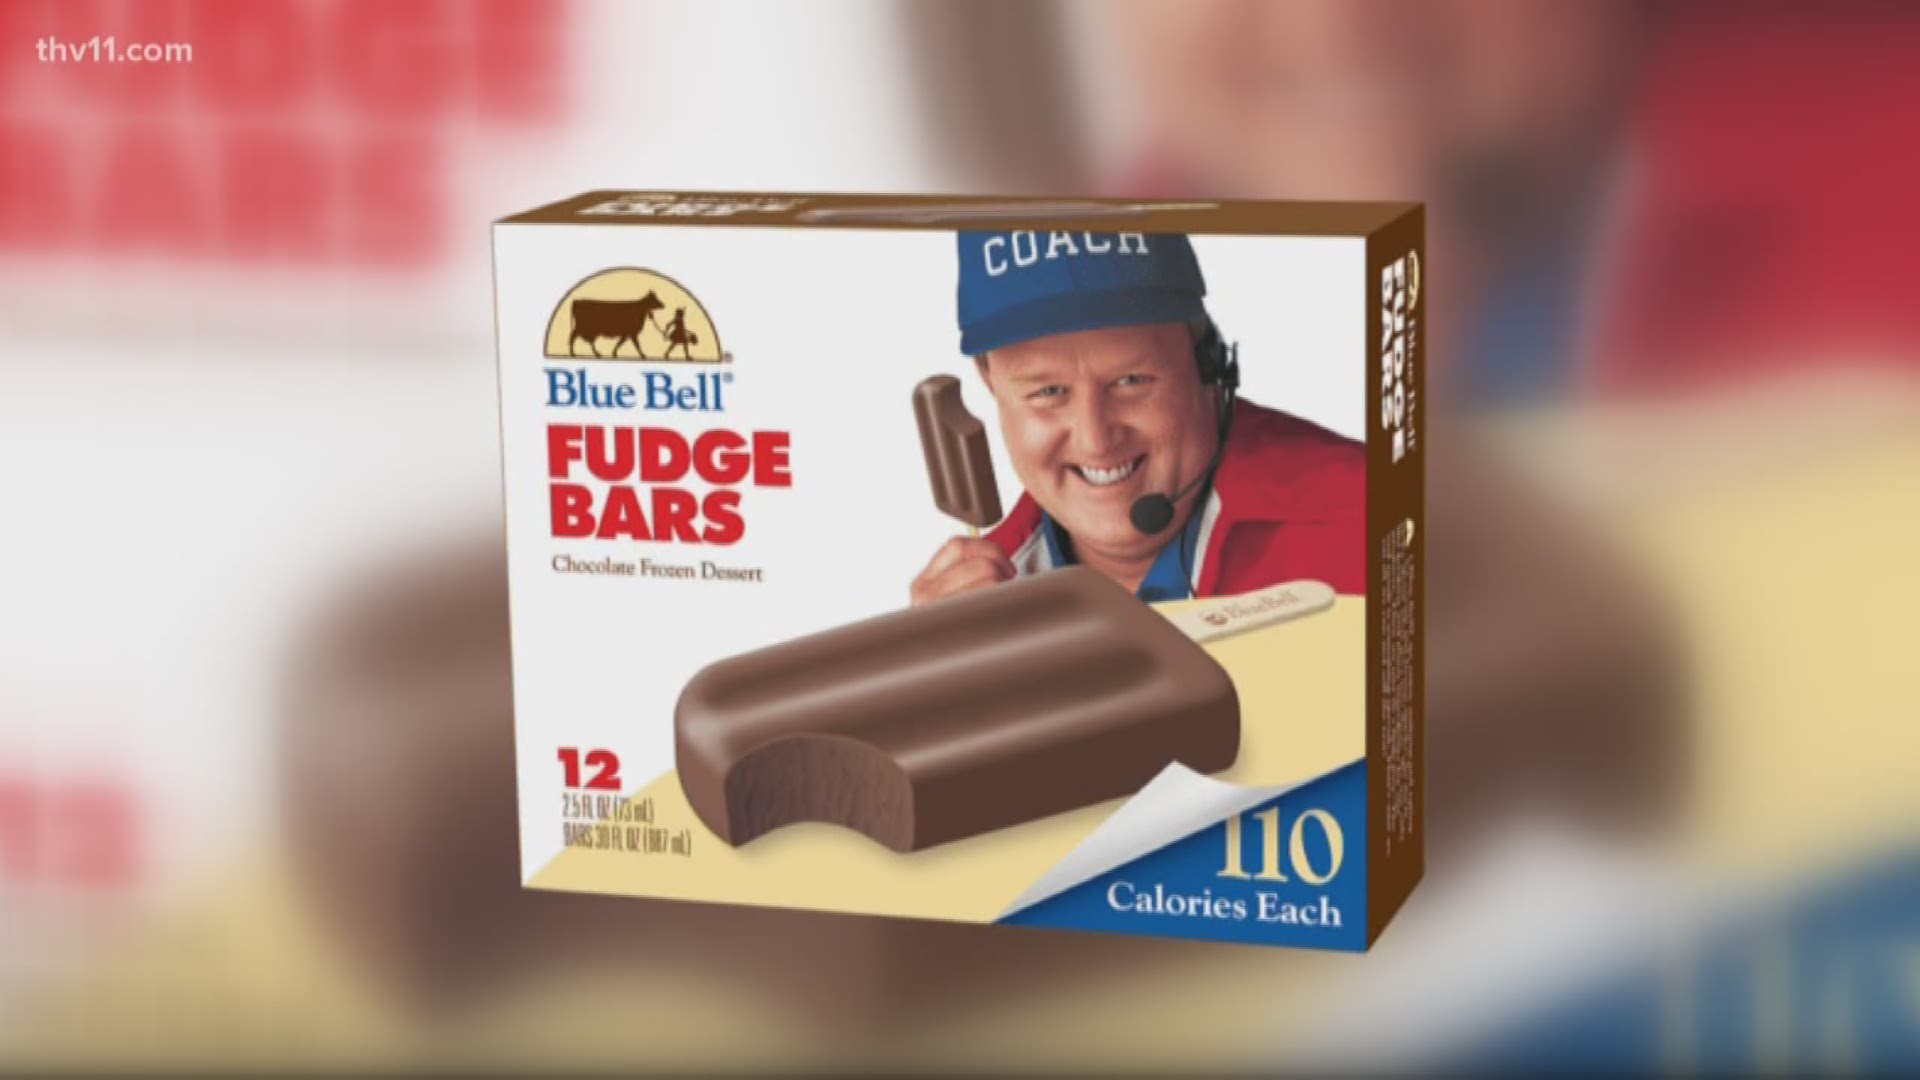 AND FOR THOSE WITH A SWEET TOOTH, LISTEN UP! BLUE BELL IS BRINGING BACK FUDGE BARS!